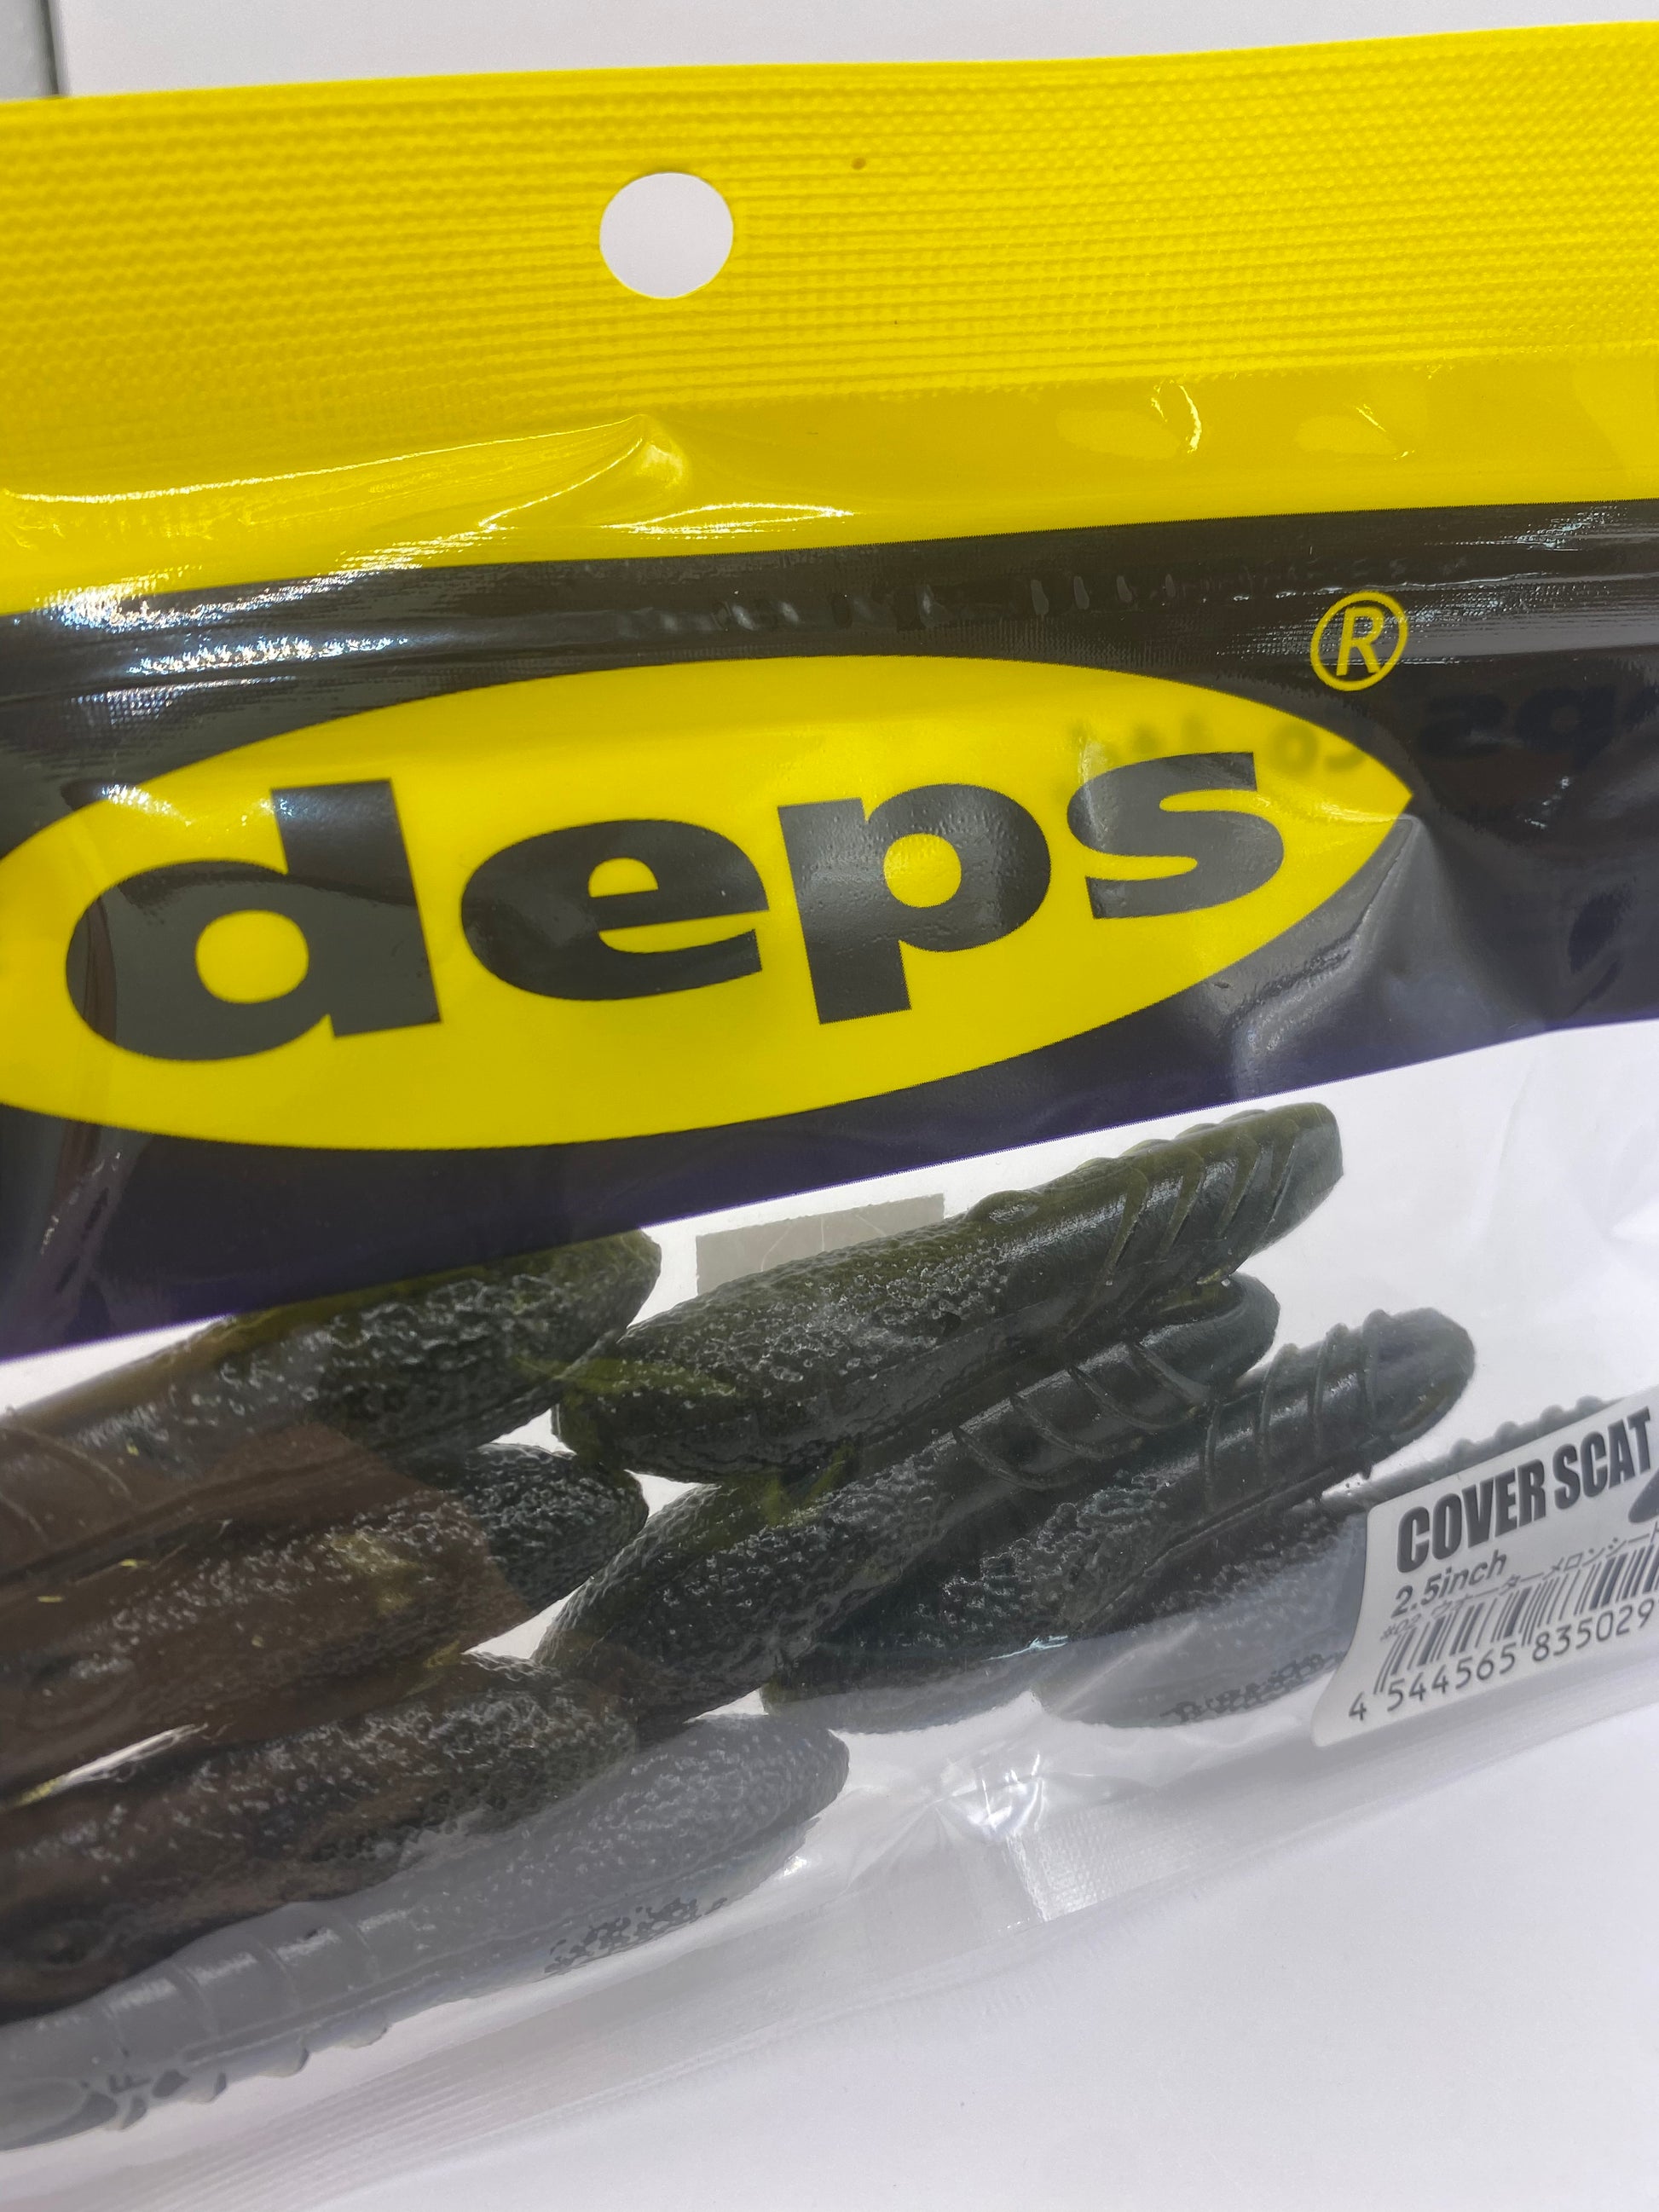 🔥DAILY SPECIAL🔥 25% Off Deps Cover Scat Soft Stick Bait Now: $8.24 -  $8.99, Save: $2.75 - $3.00, 25% Off Click on the link in o